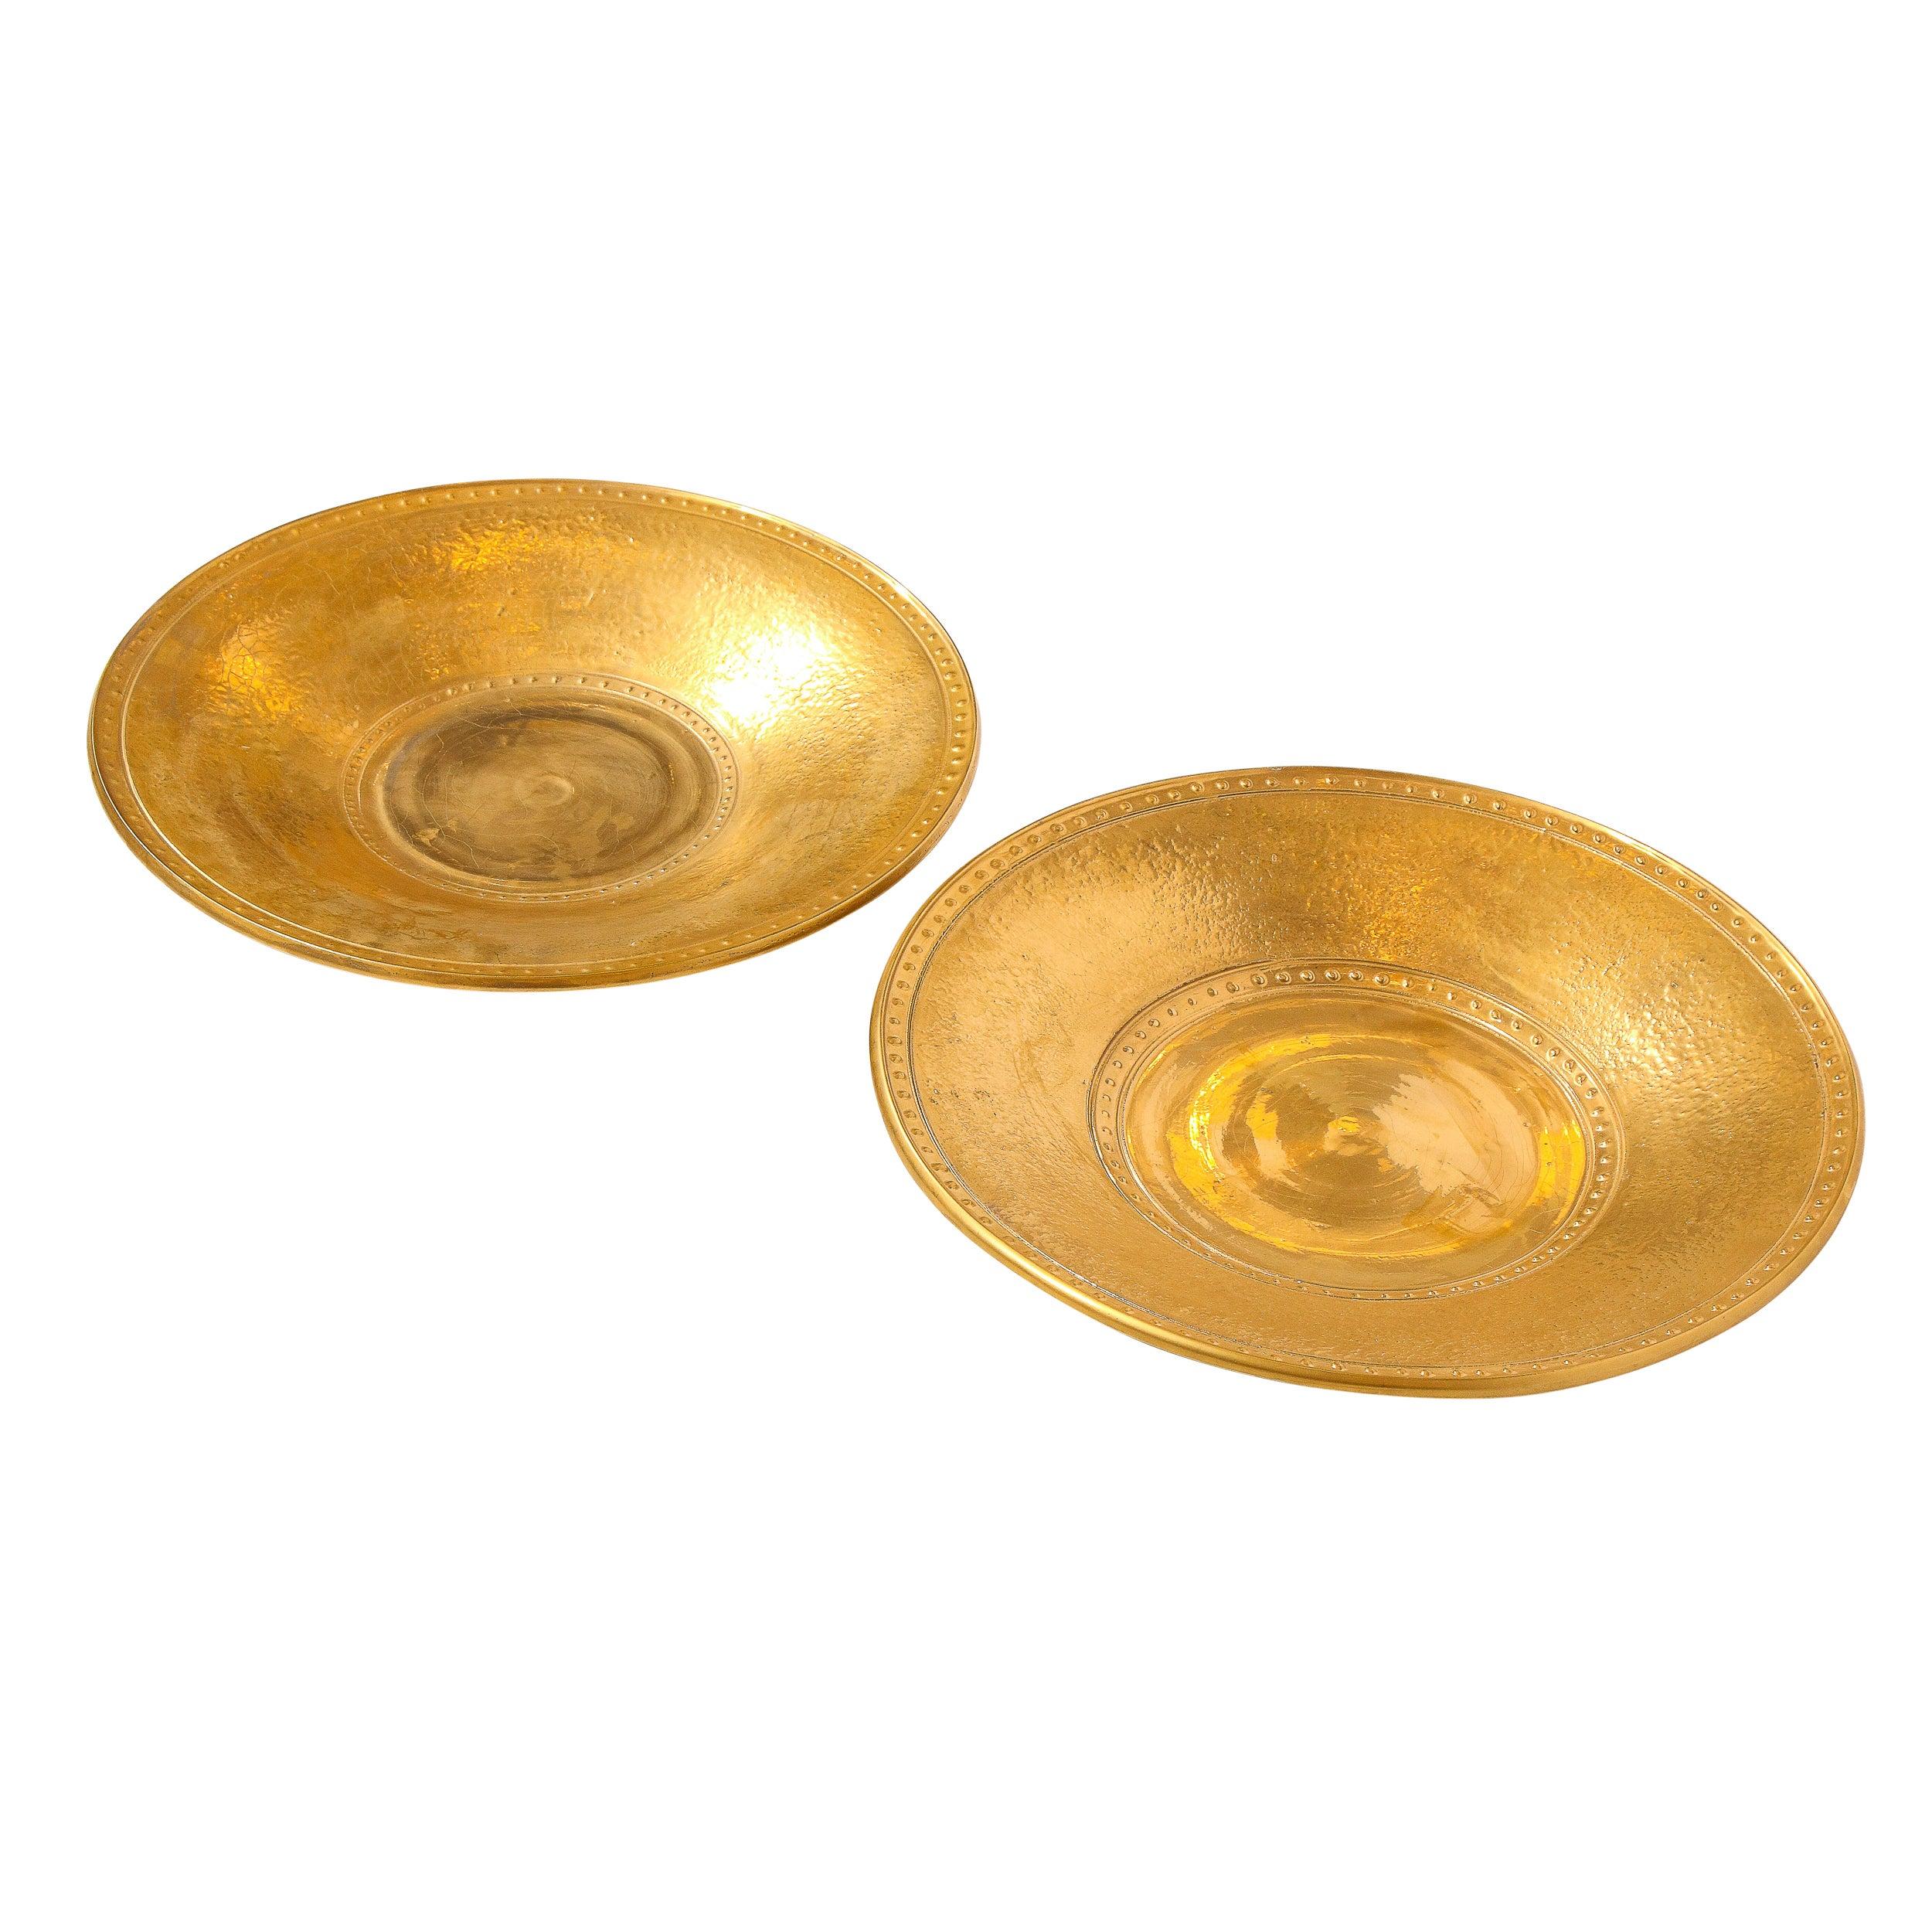 Pair of Modernist 24kt Gold Leaf Center Plates Signed Rondier by Lorin Marsh